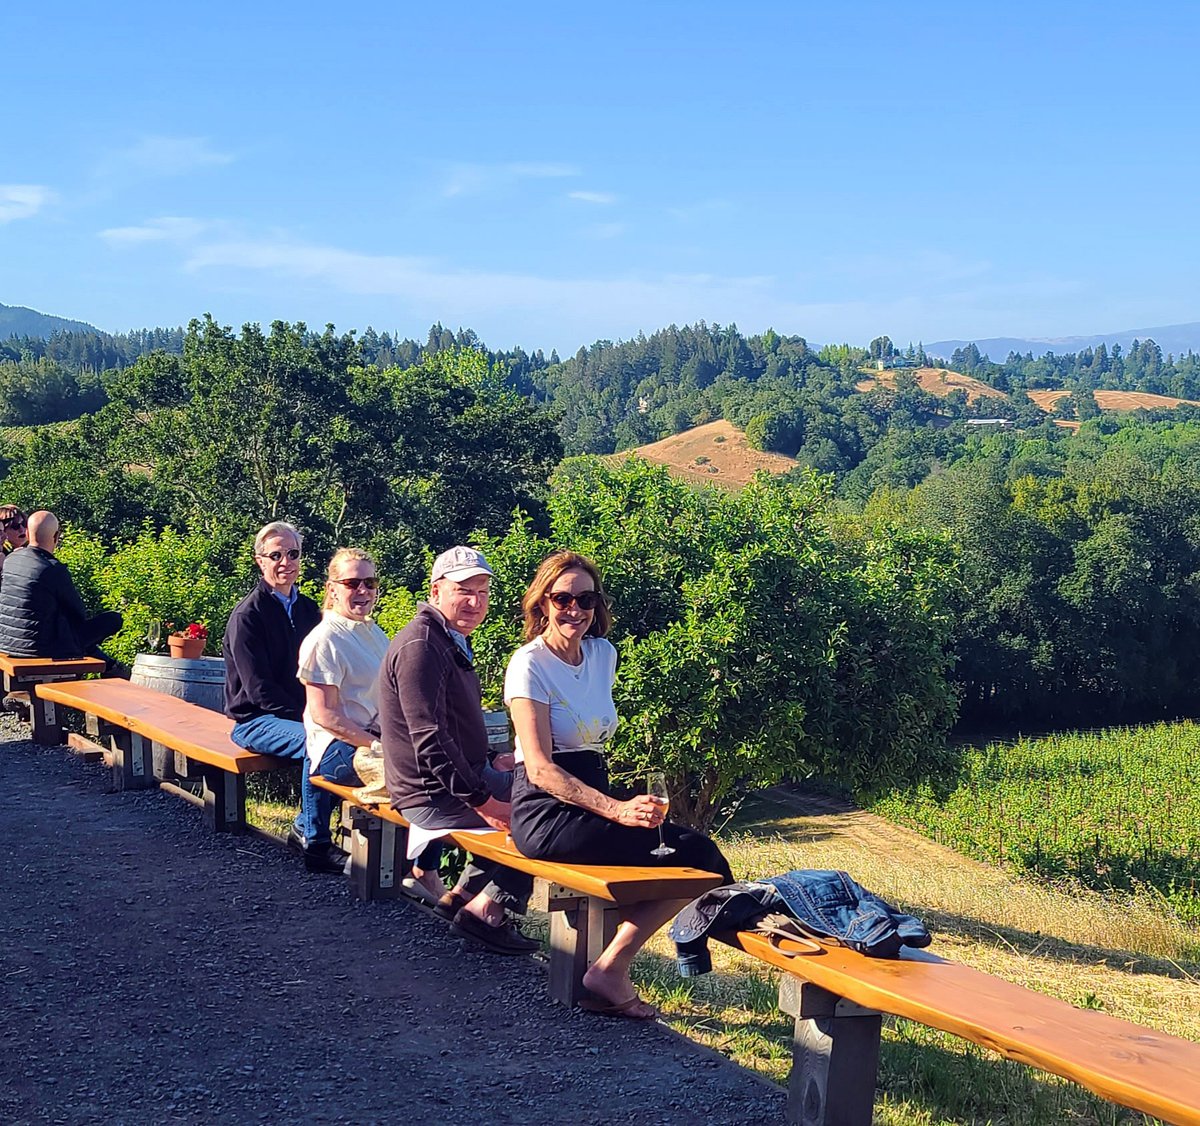 The perfect place to savor the moment.  #outdoorwinetasting #sonoma #sparklingwines